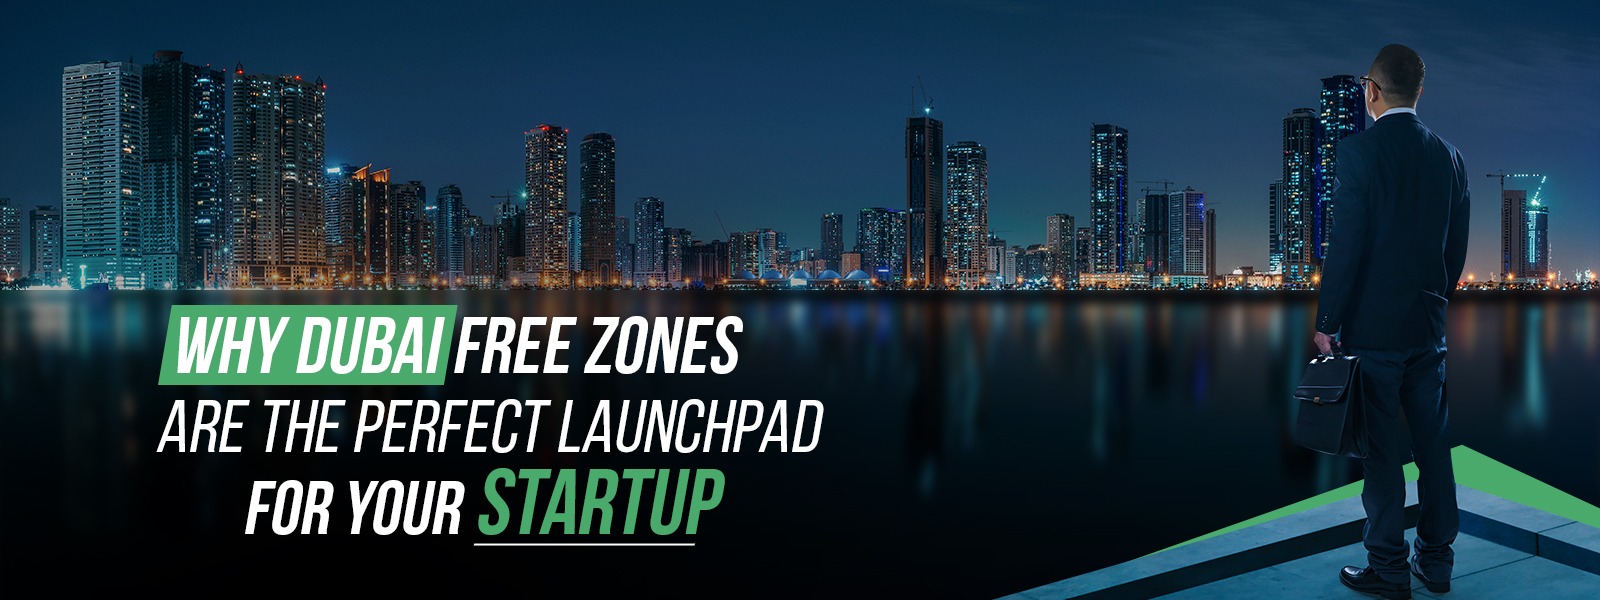 Why Dubai Free Zones are the Perfect Launchpad for Your Startup